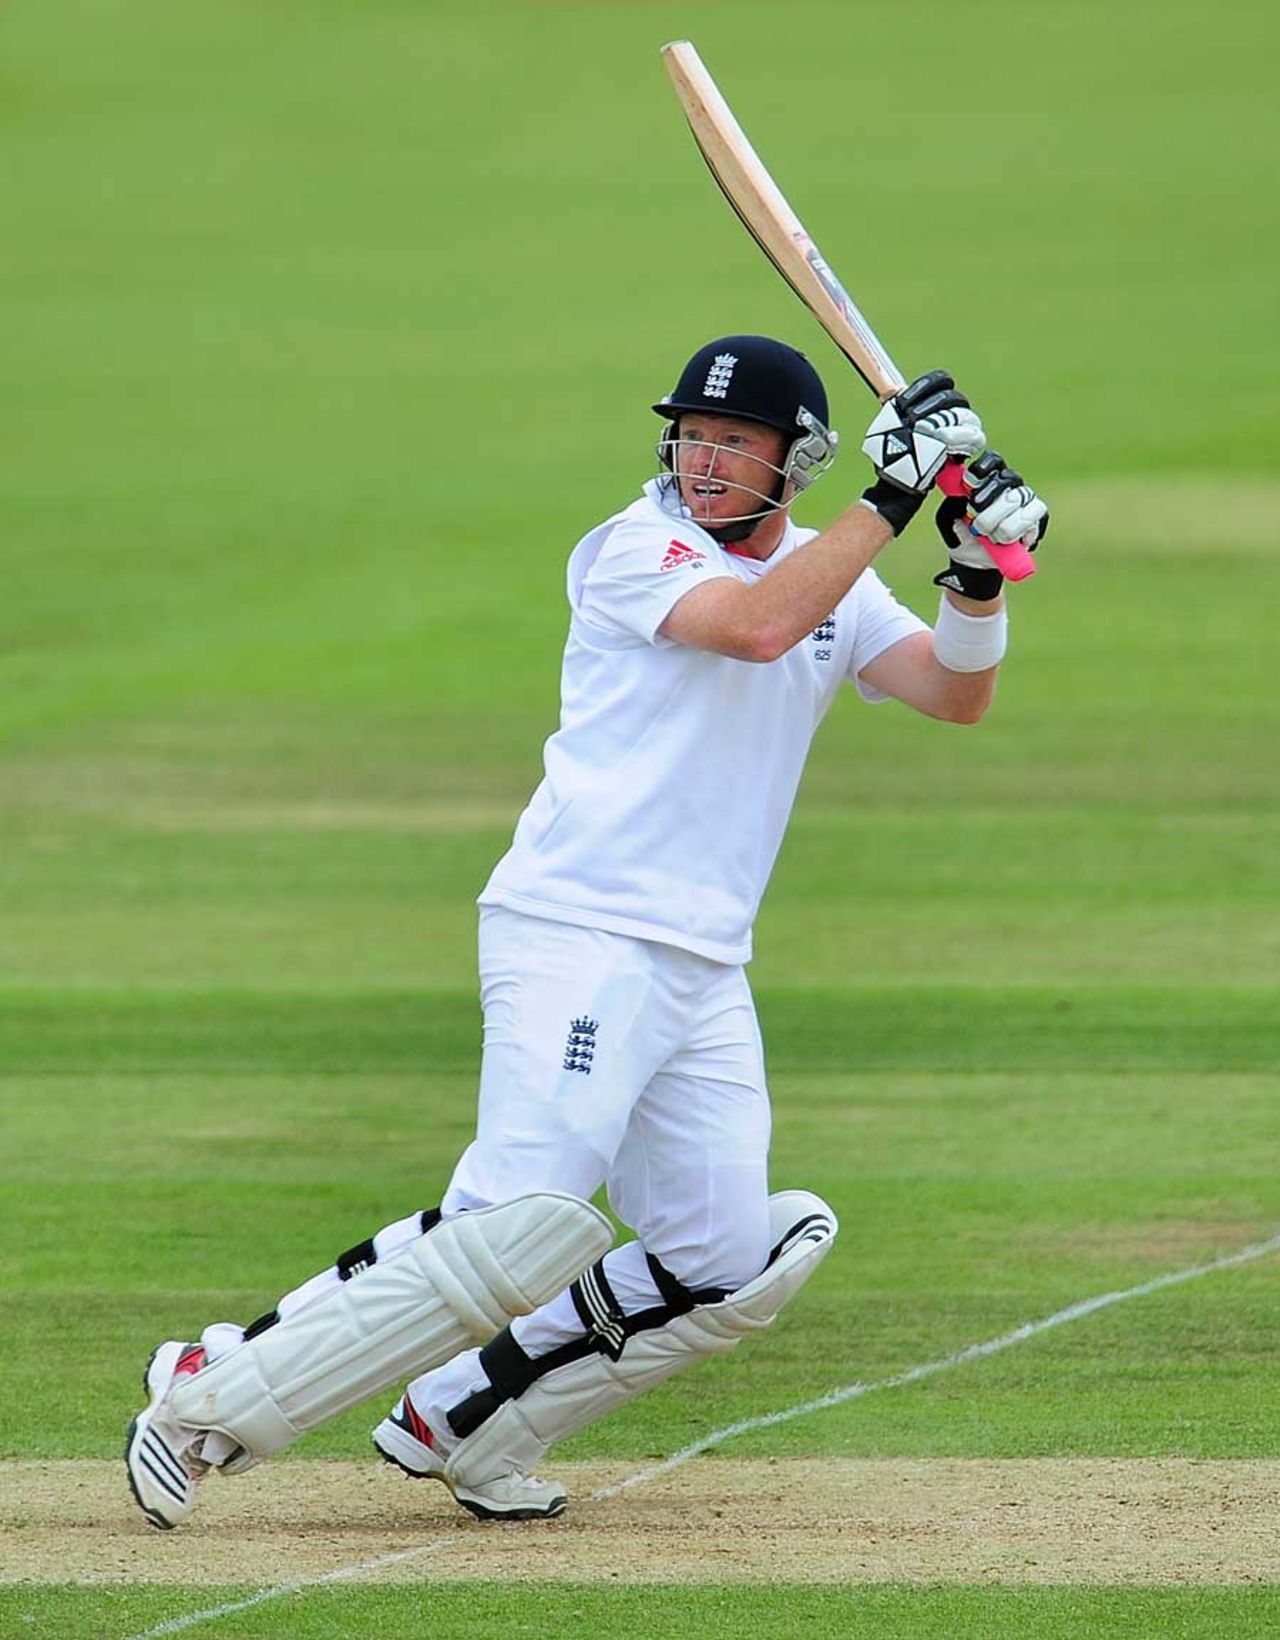 Ian Bell continued his outstanding form with another confident innings, England v Sri Lanka, 3rd Test, Rose Bowl, June 19, 2011